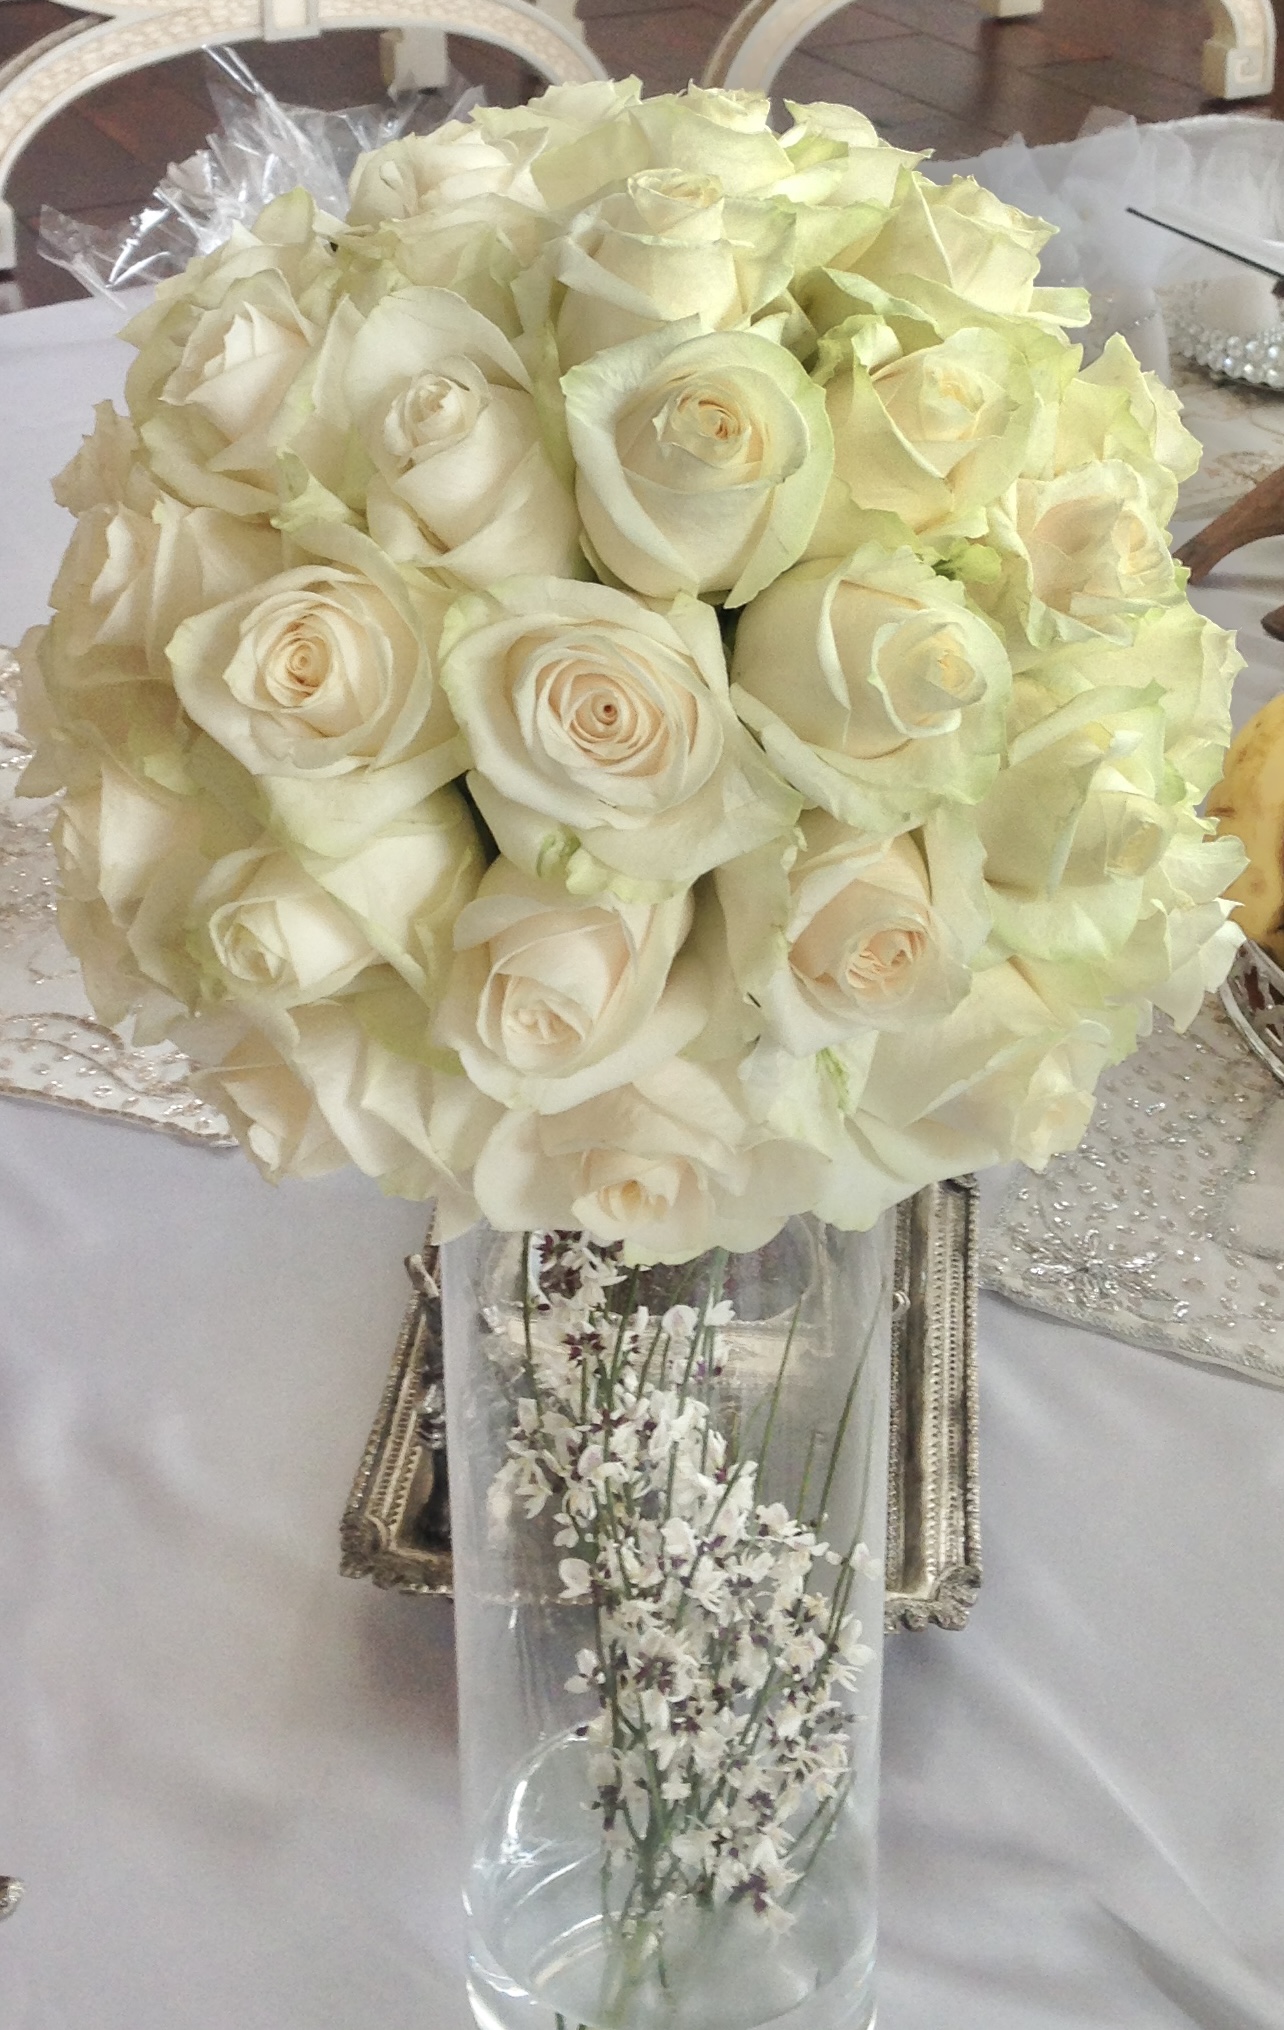 A vase filled with white roses on top of a table.